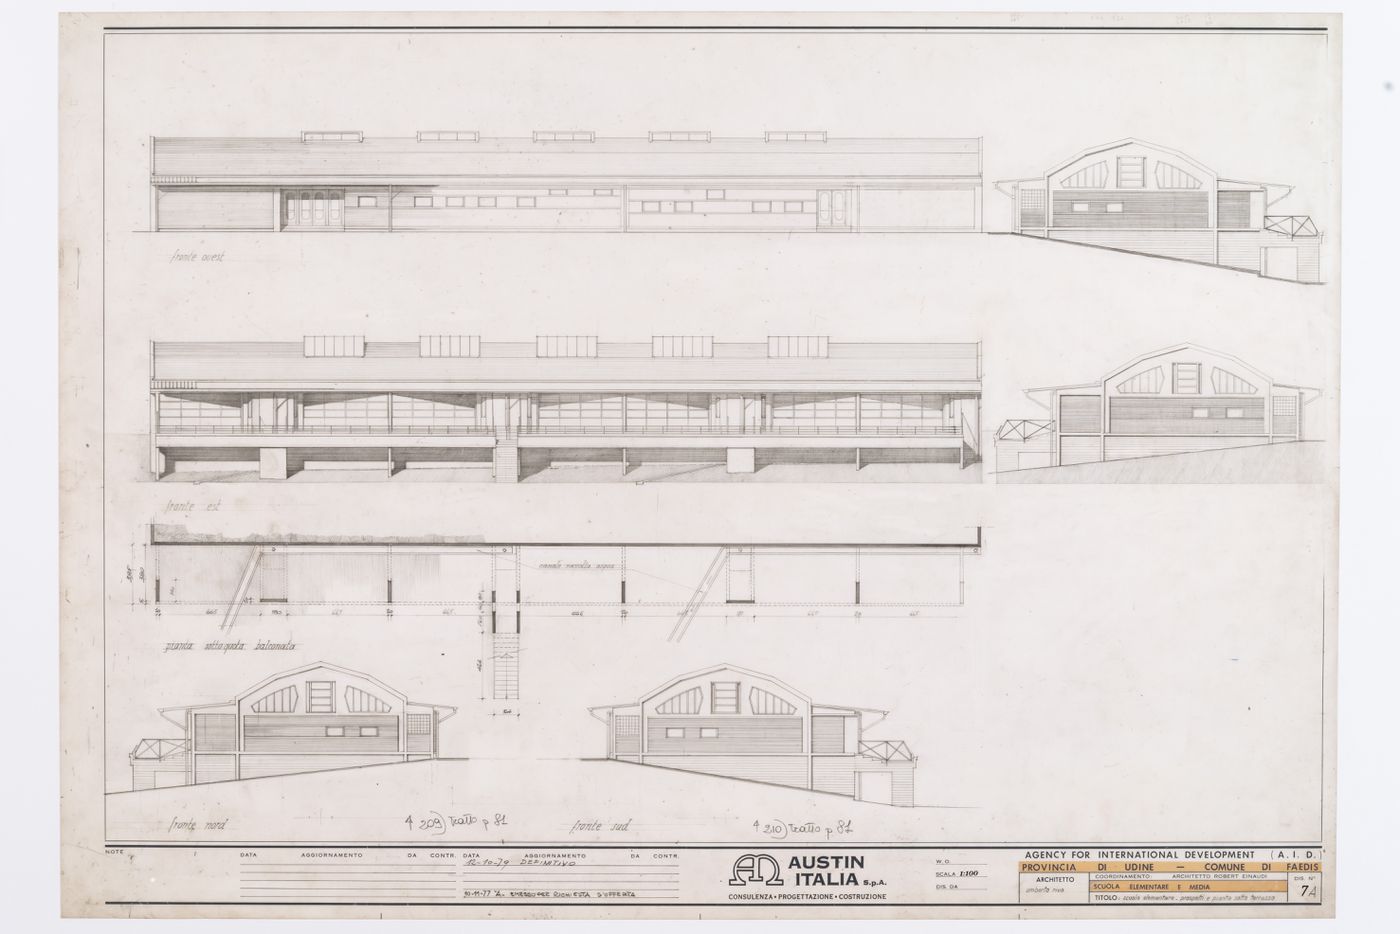 Elevations and plan for Scuola Faedis, Udine, Italy